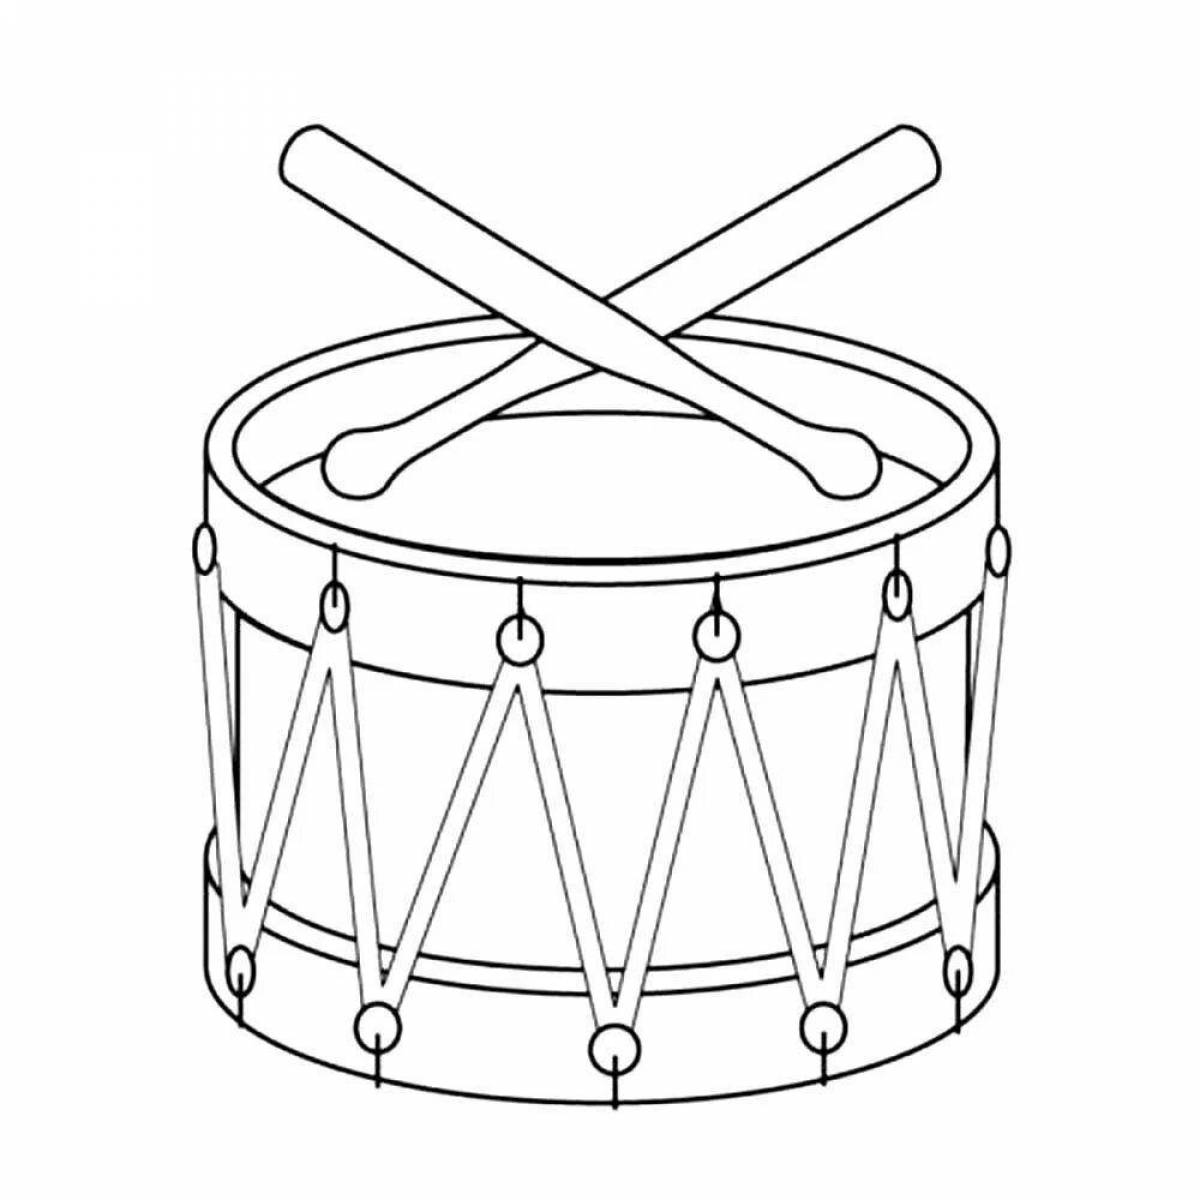 Coloring page fascinating musical instruments